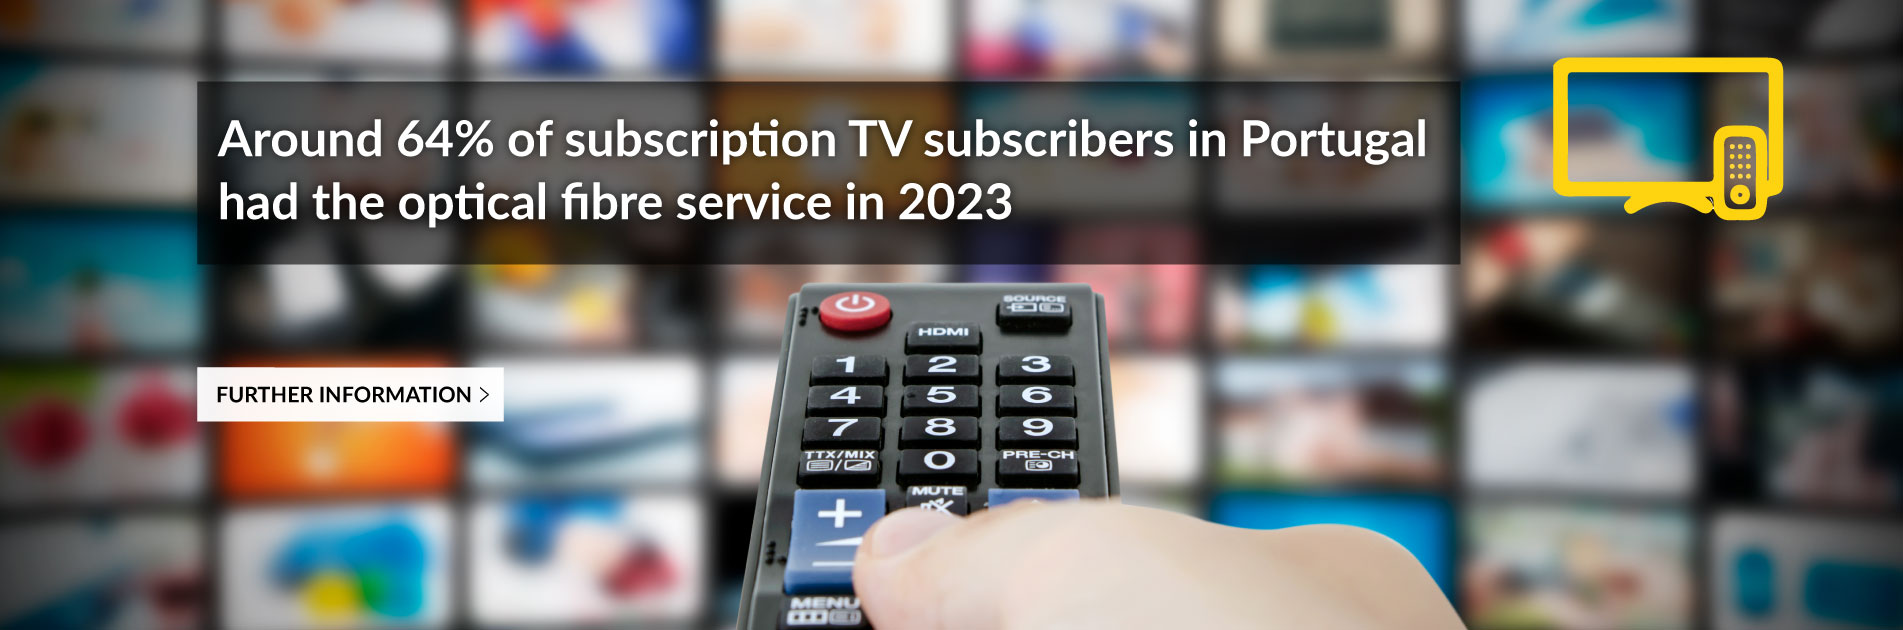 At the end of 2023, there were 4.6 million subscribers to the subscription TV service in Portugal, of which 2.9 million had the optical fibre service. The majority of households had subscription TV (98.3%).